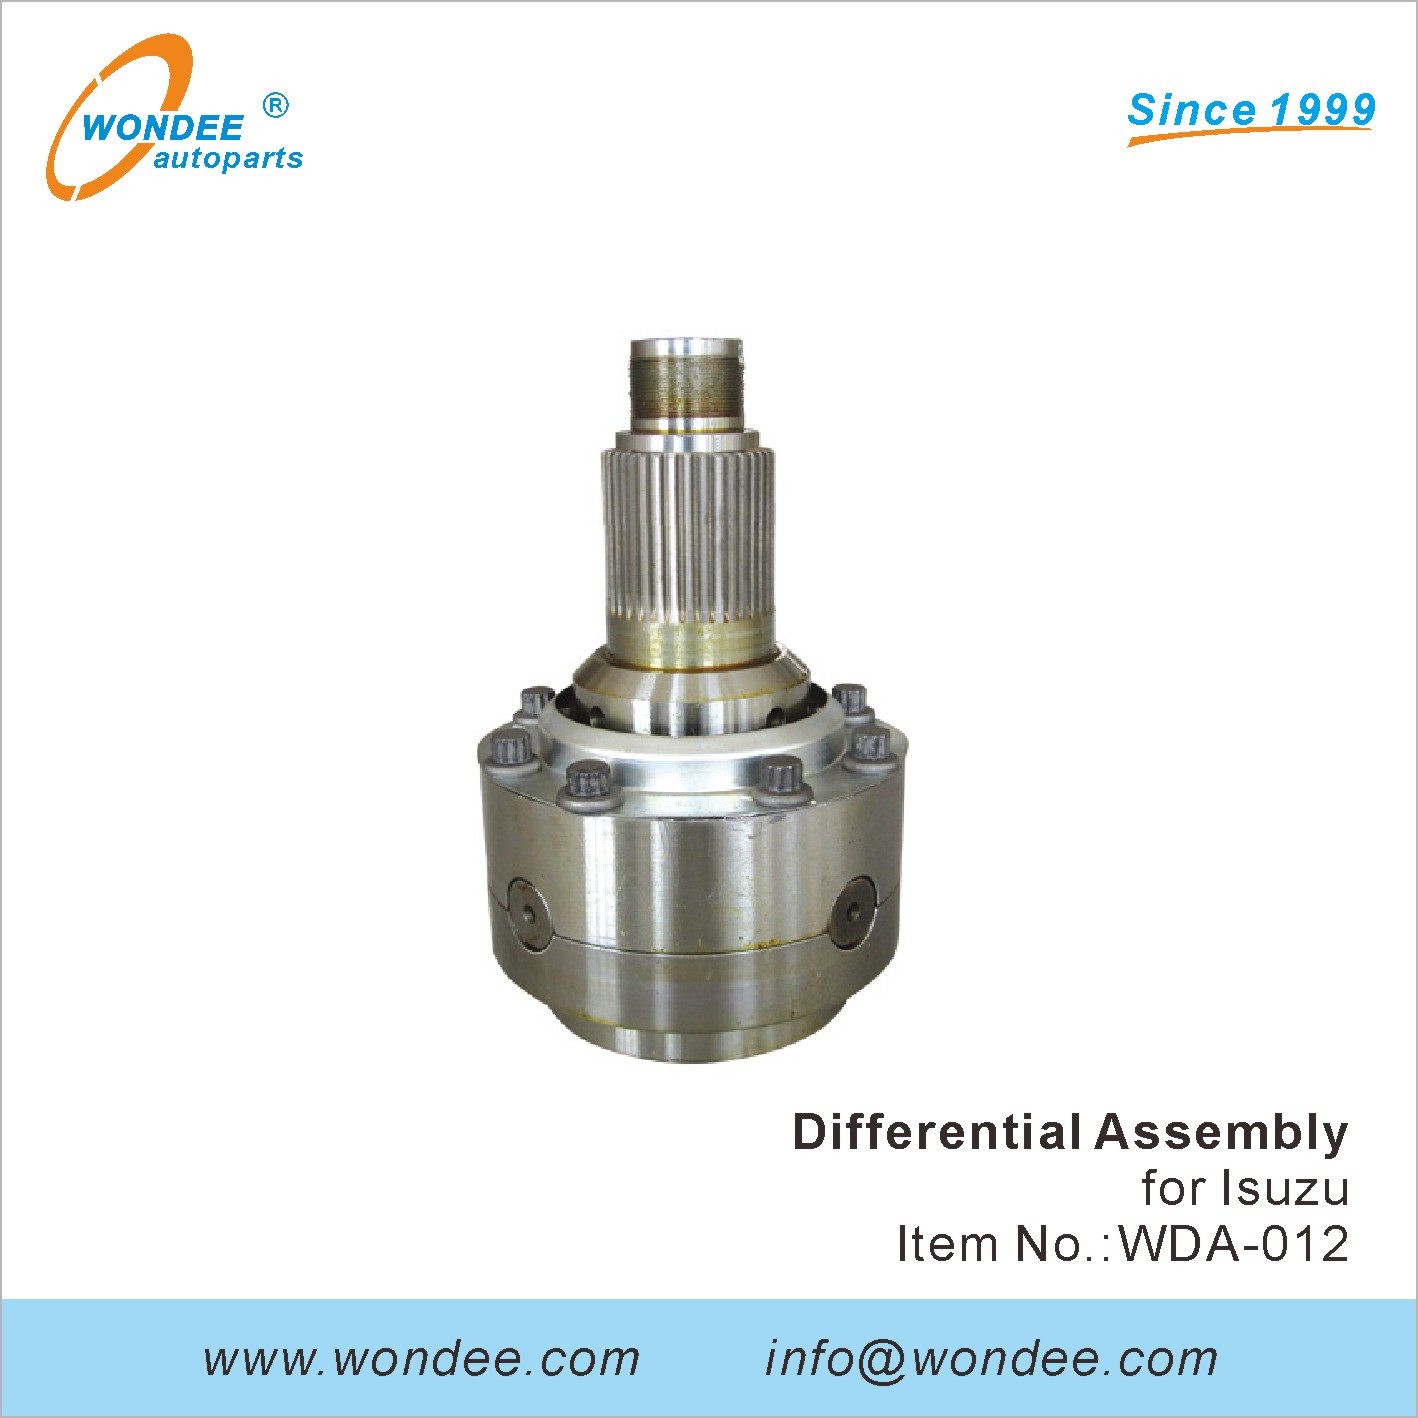 WONDEE differential assembly (12)